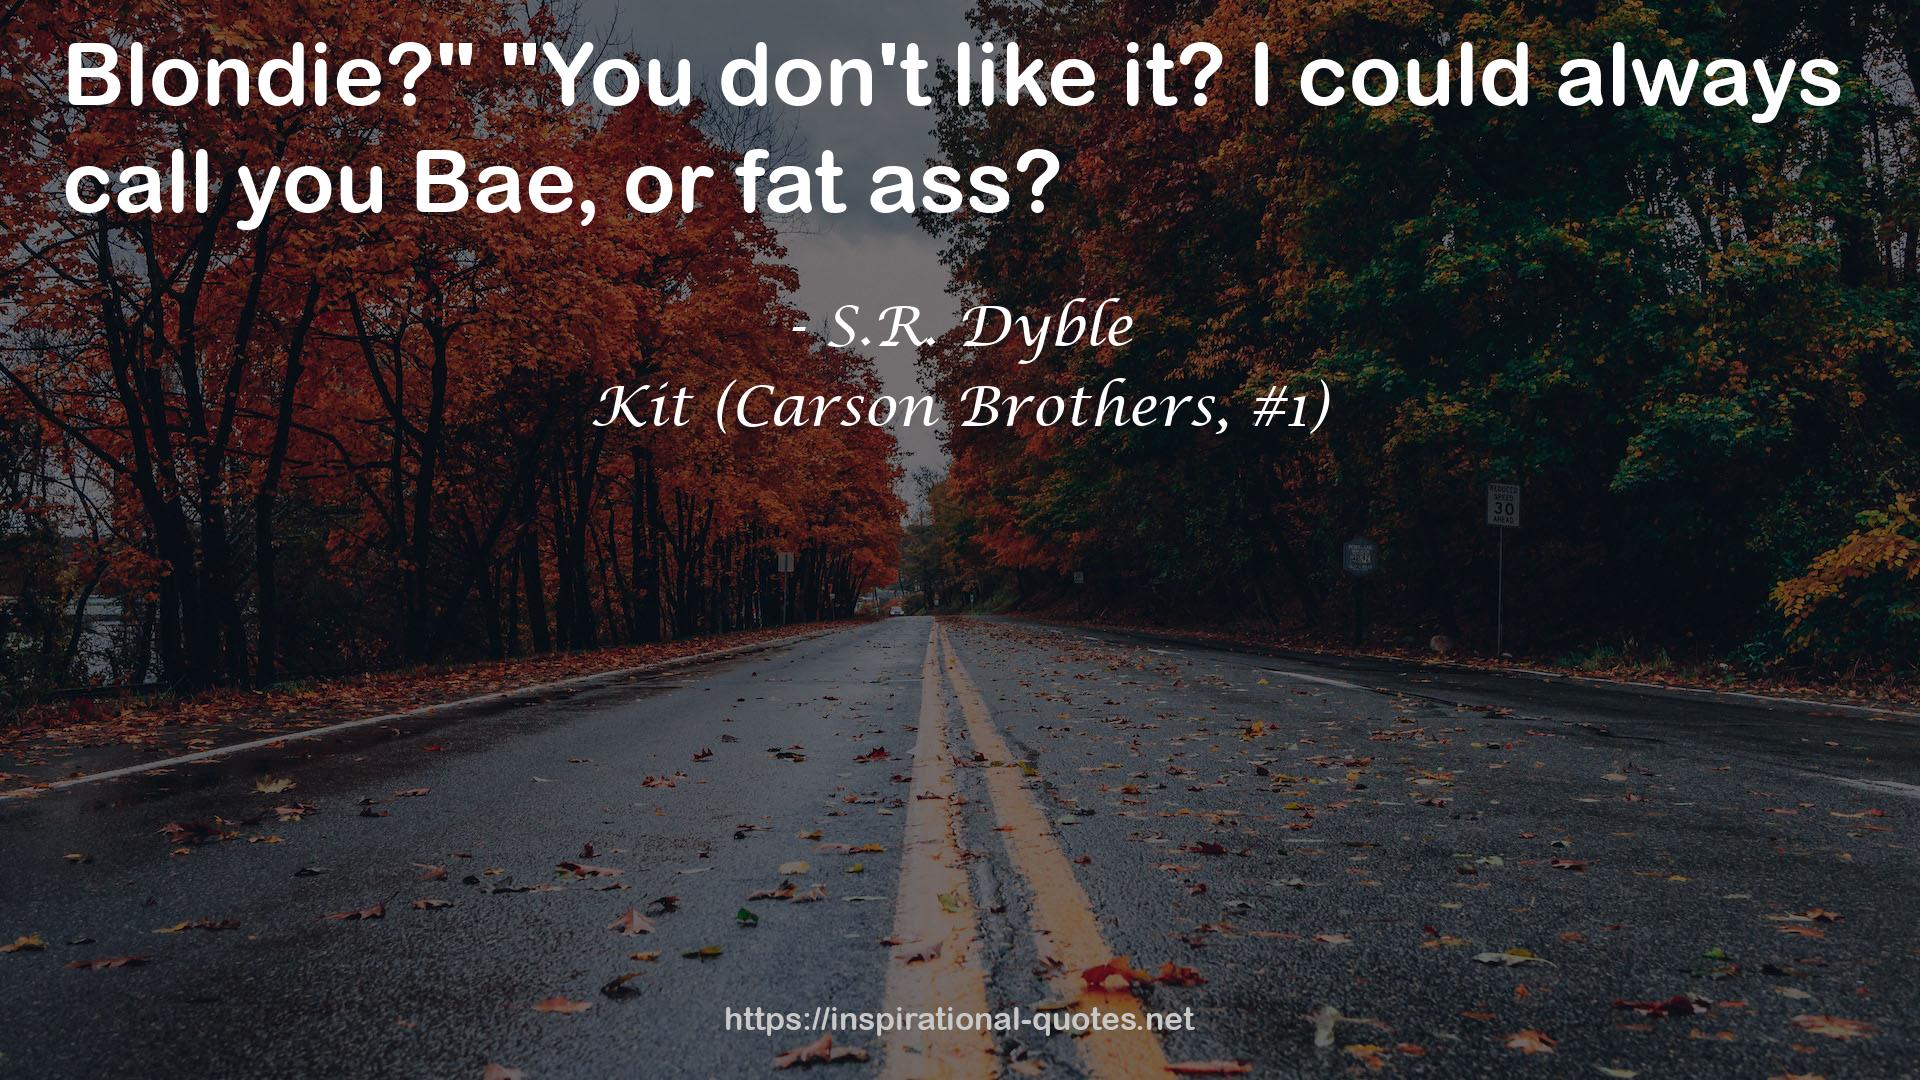 Kit (Carson Brothers, #1) QUOTES